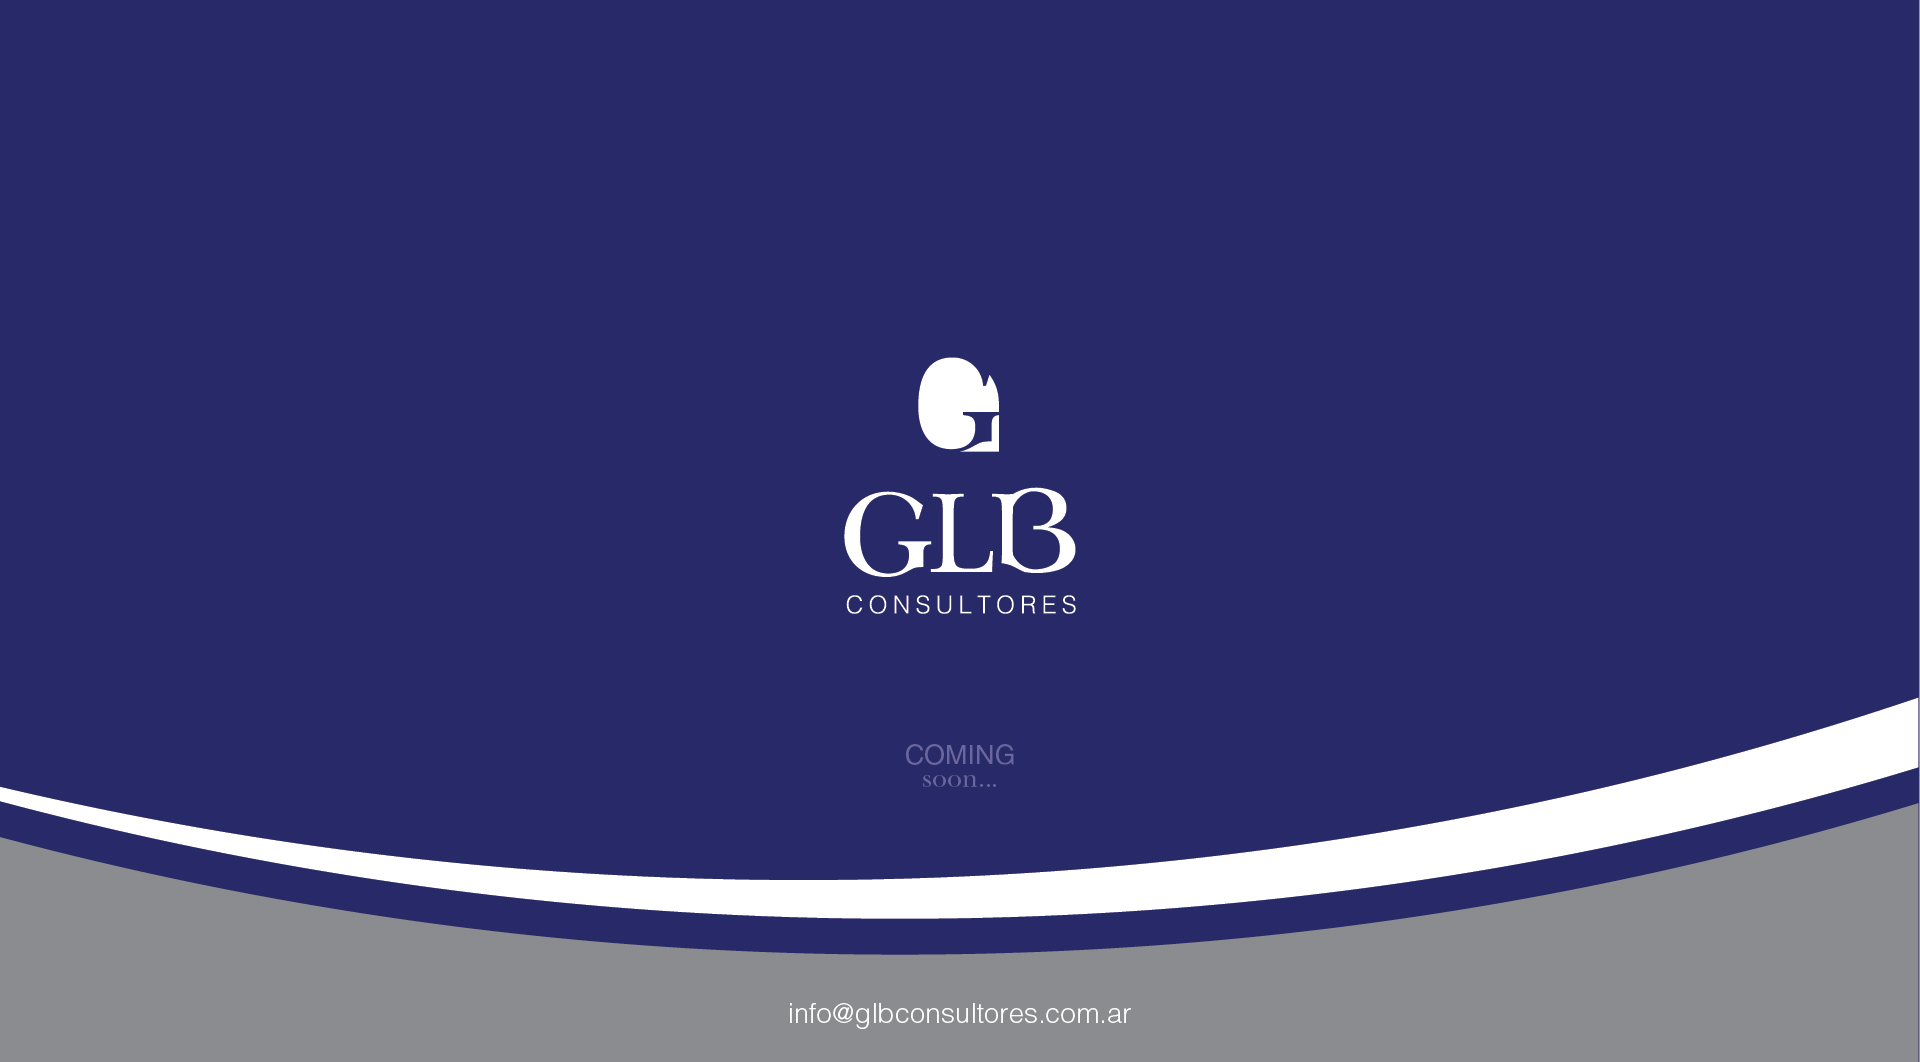 GLB Consultores. Coming  soon.